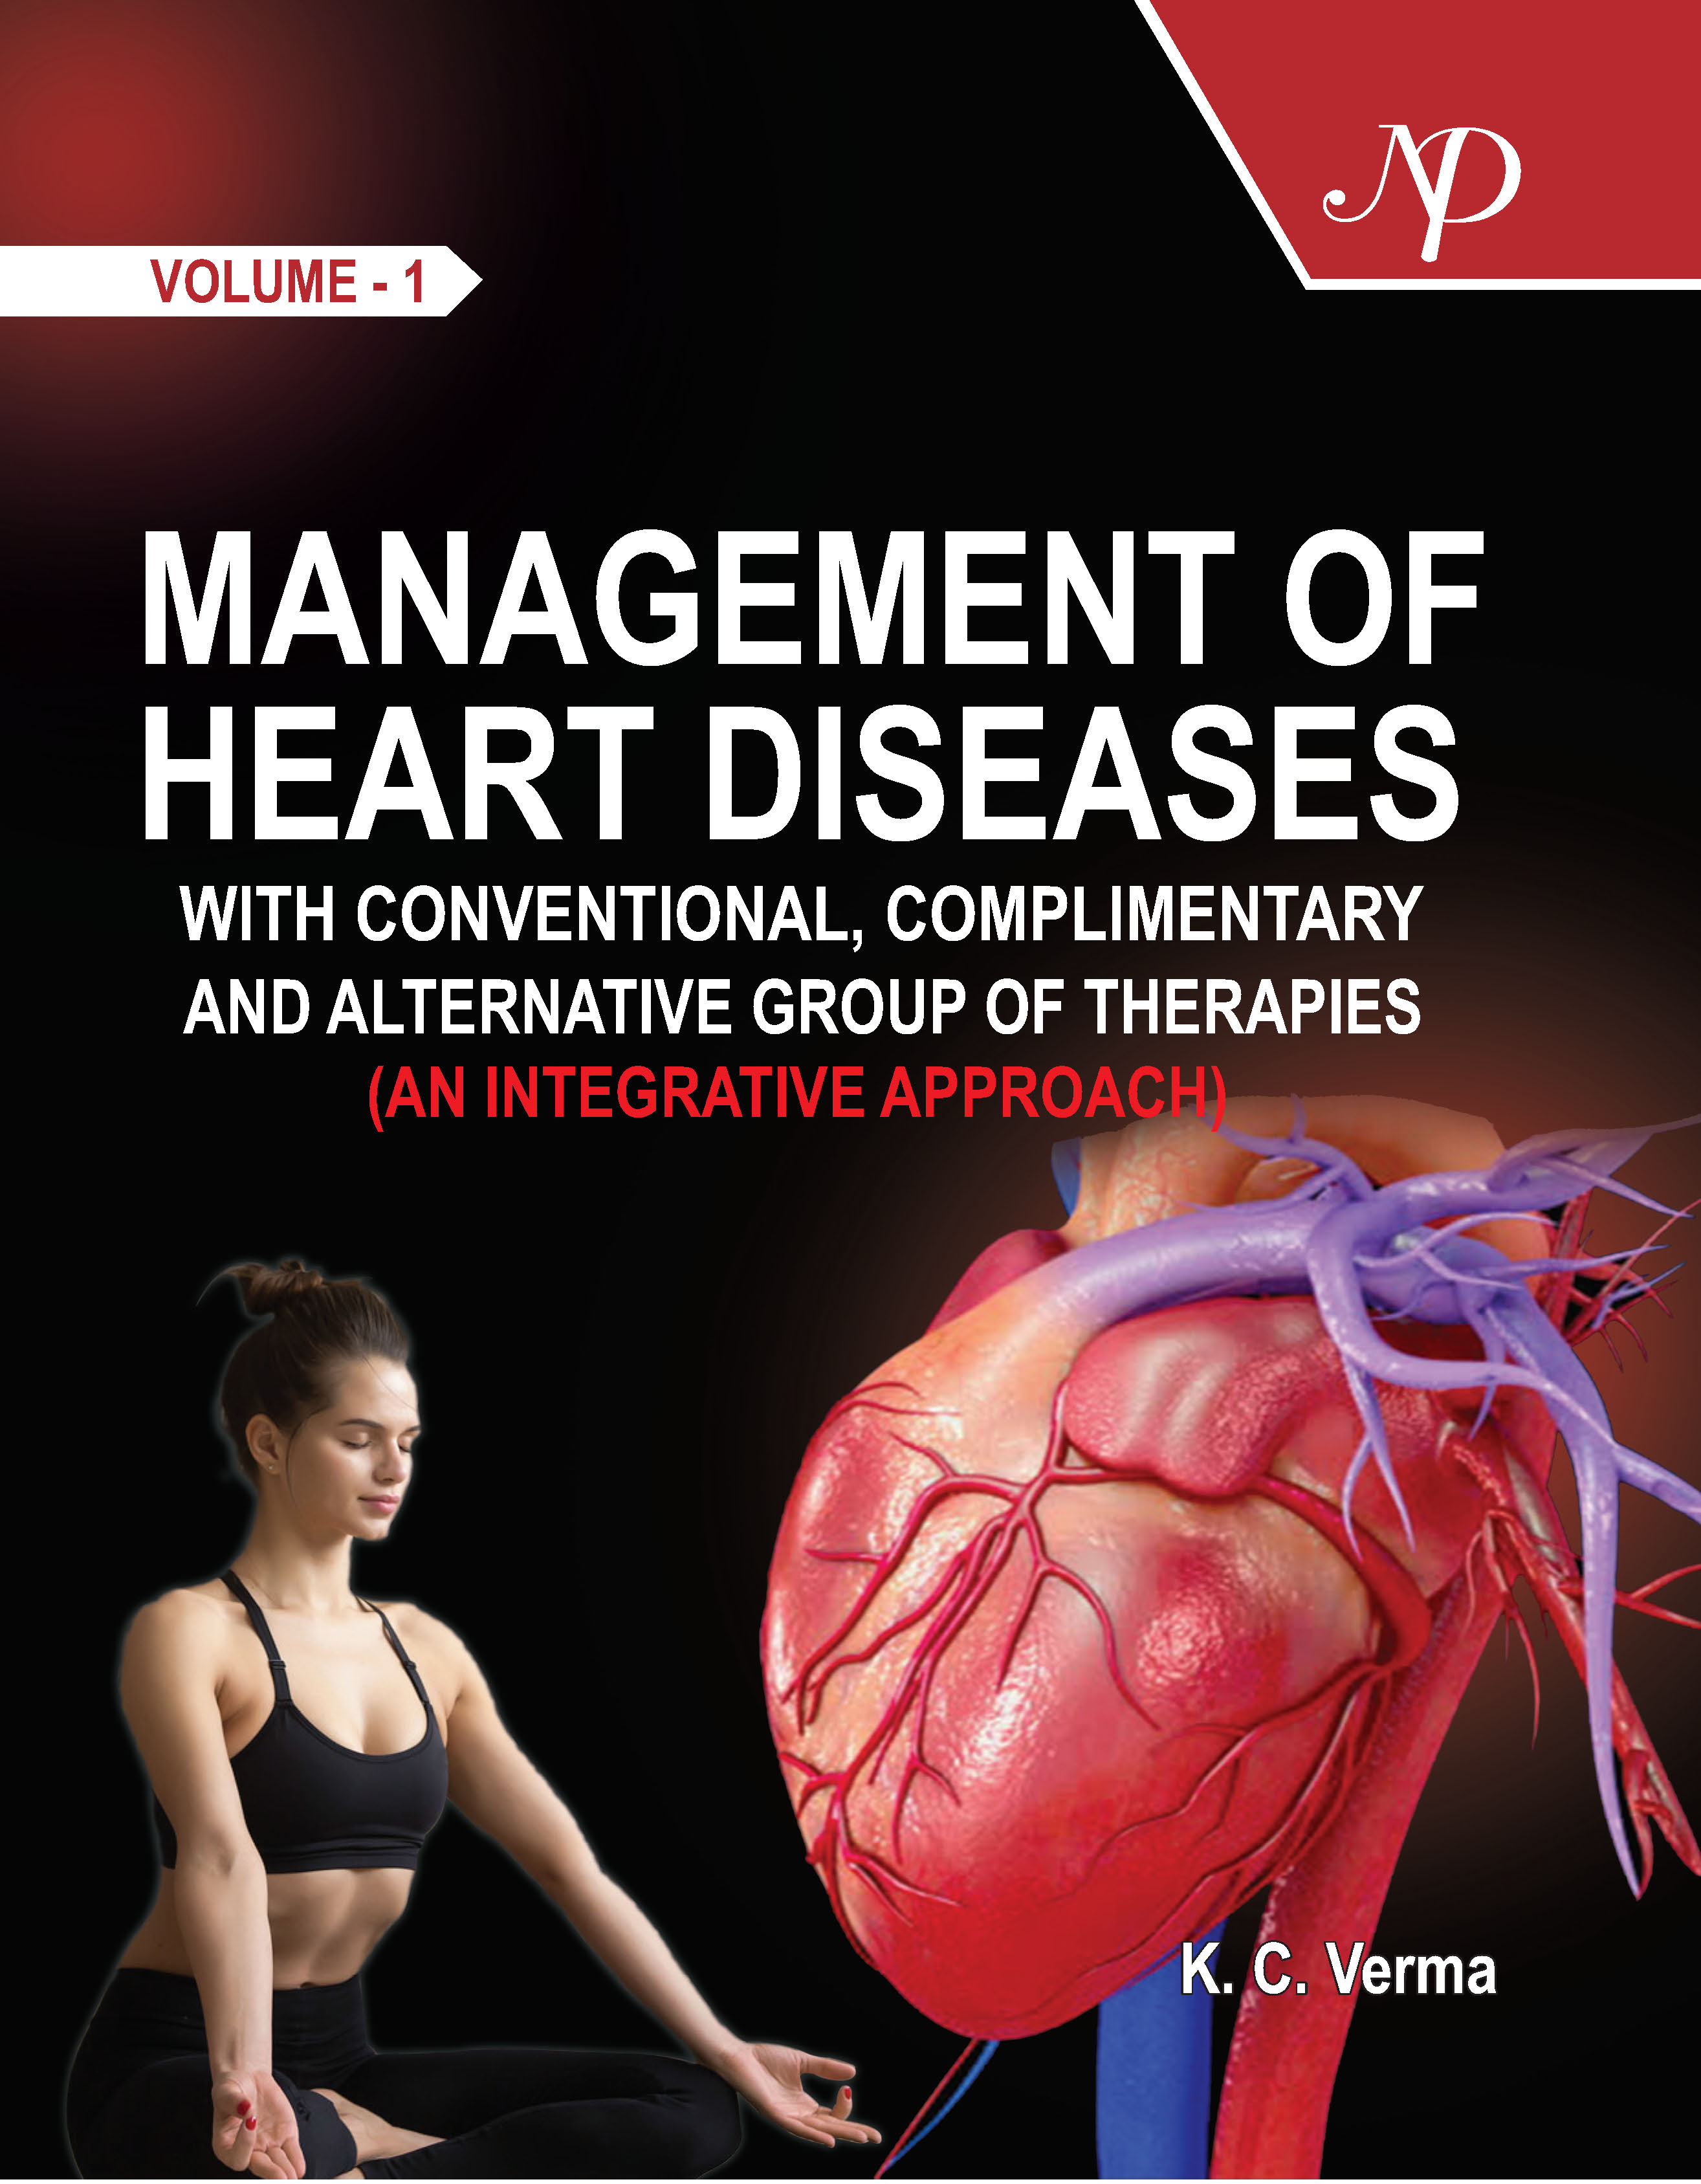 Management of Cover Heart Diseases with Conventional, Complimentary and Alternative Group of Therapies.jpg